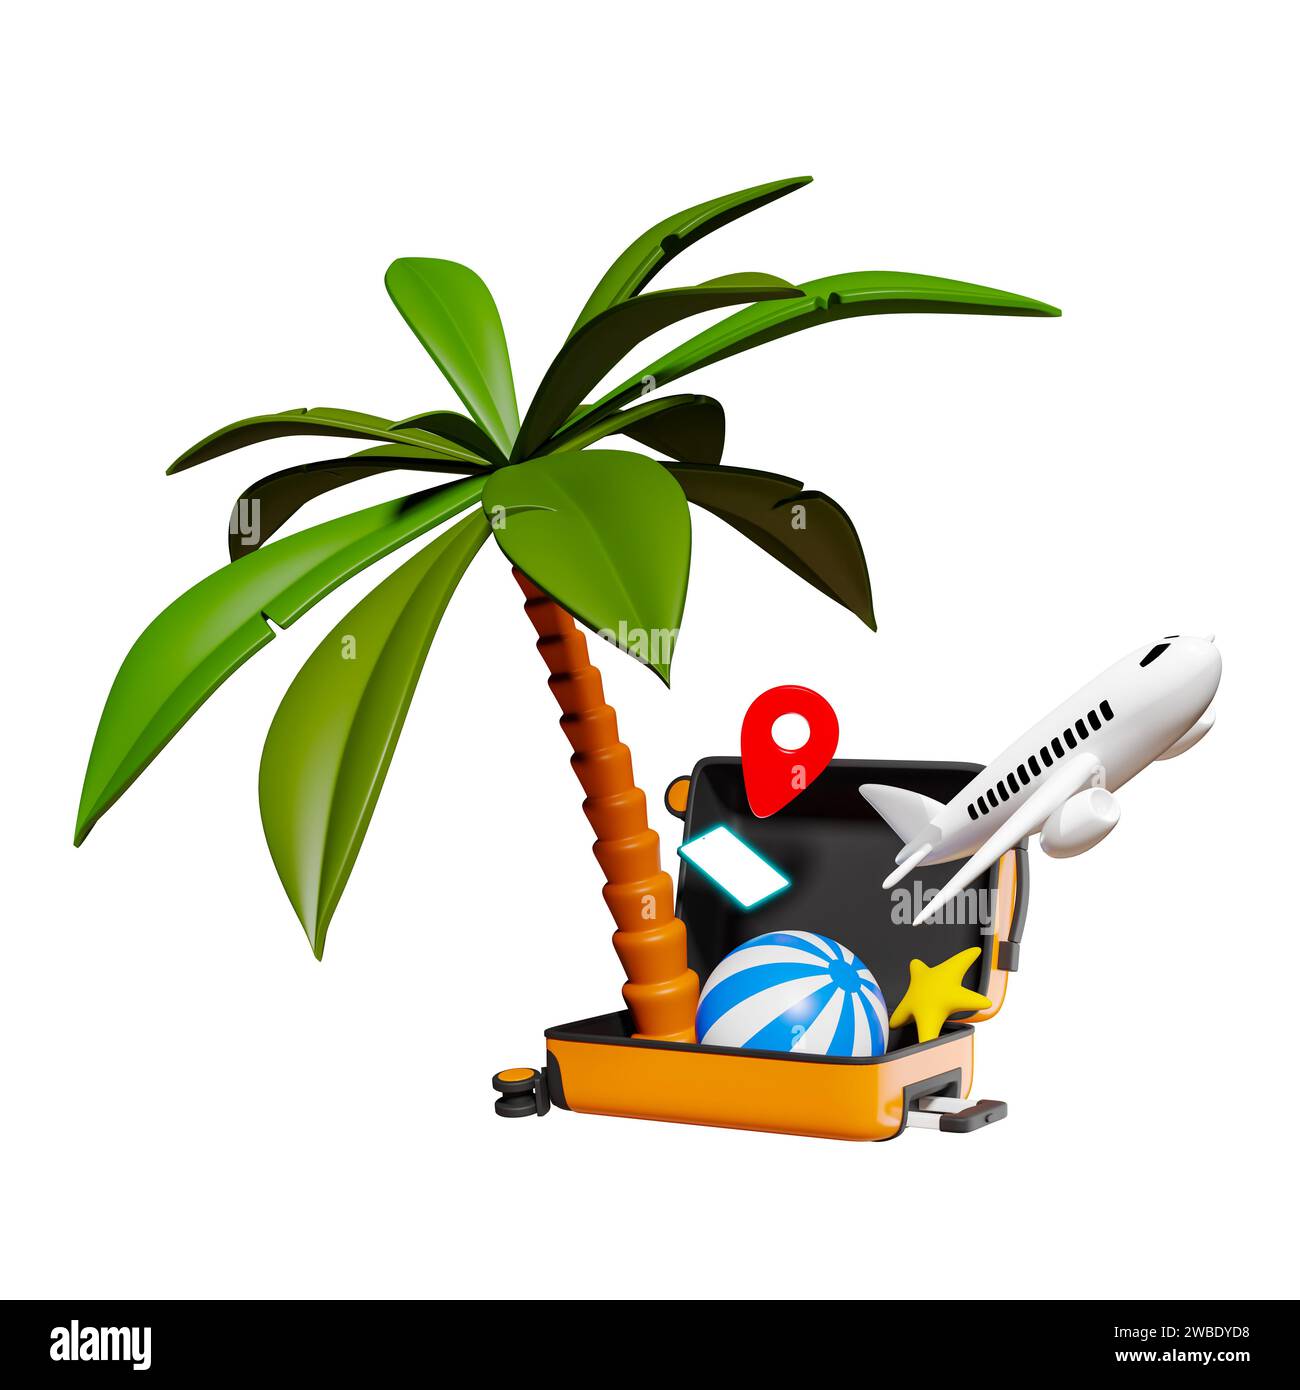 Palm tree, beach ball, starfish, plane, smart phone and a map pin jumping out of opened suitcase isolated. 3d rendering Stock Photo